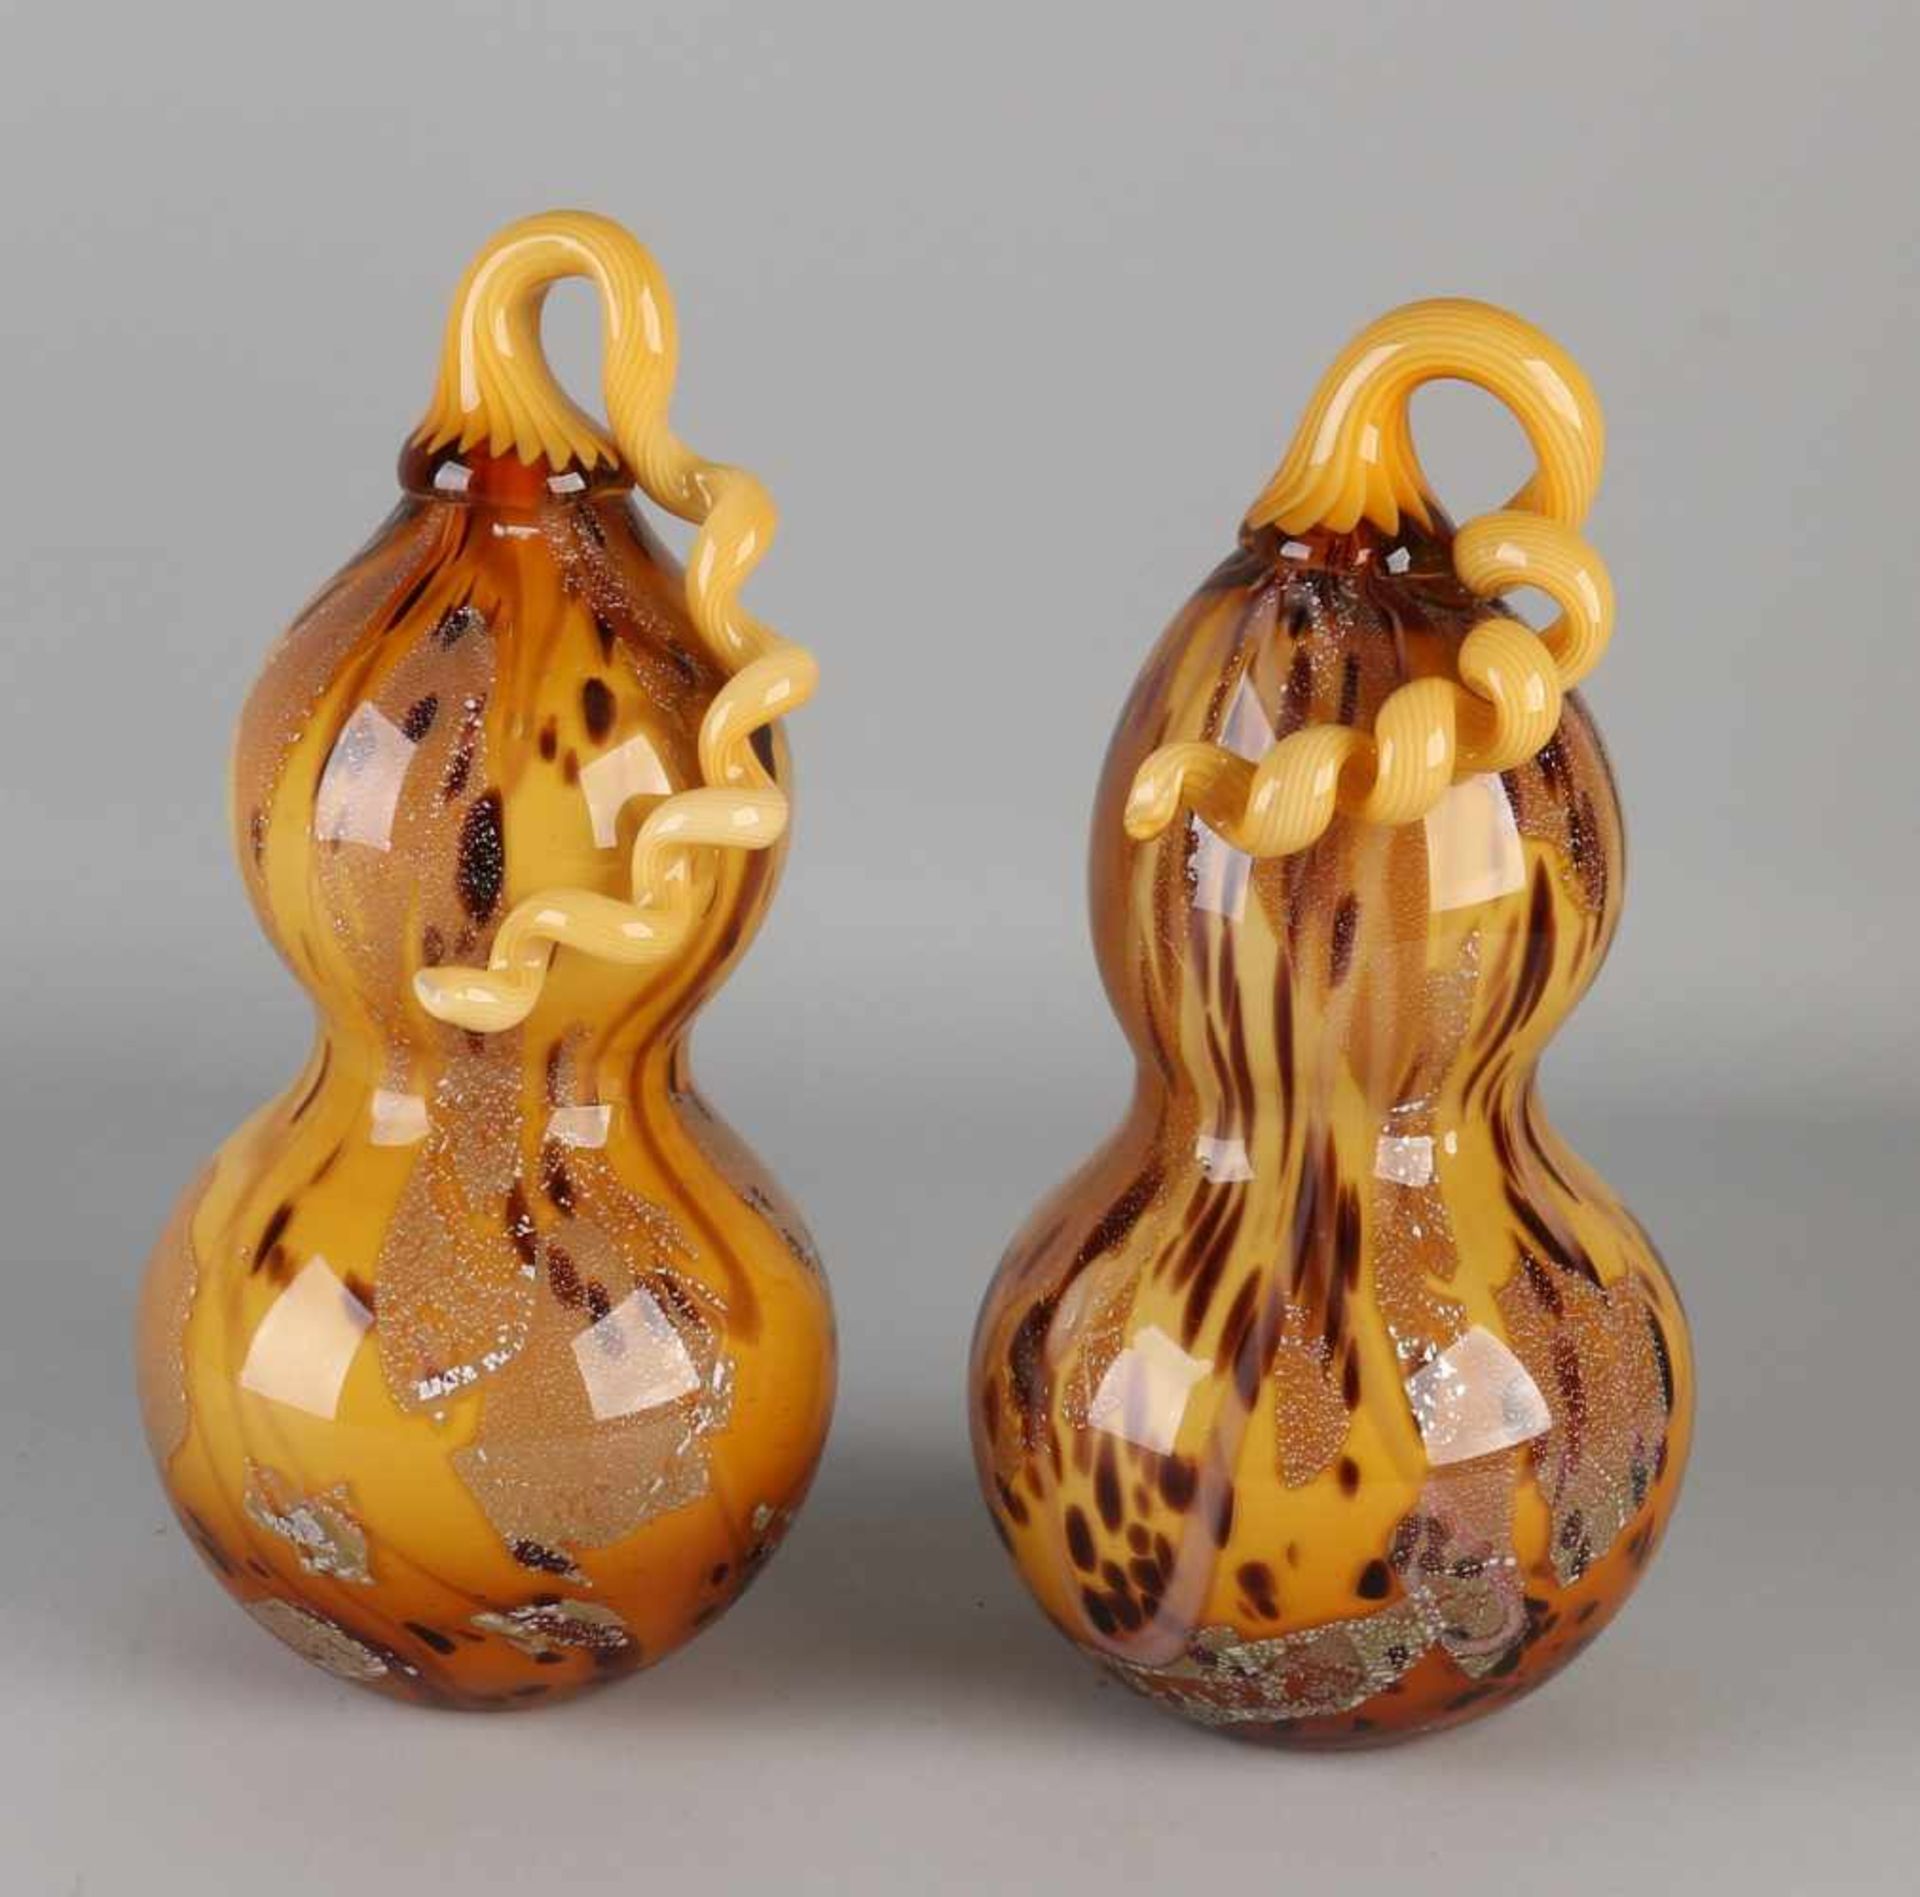 Two large Murano-style glass pumpkins. Glasfusing ocher / brown. 21st century. Size: H 28-29 cm.